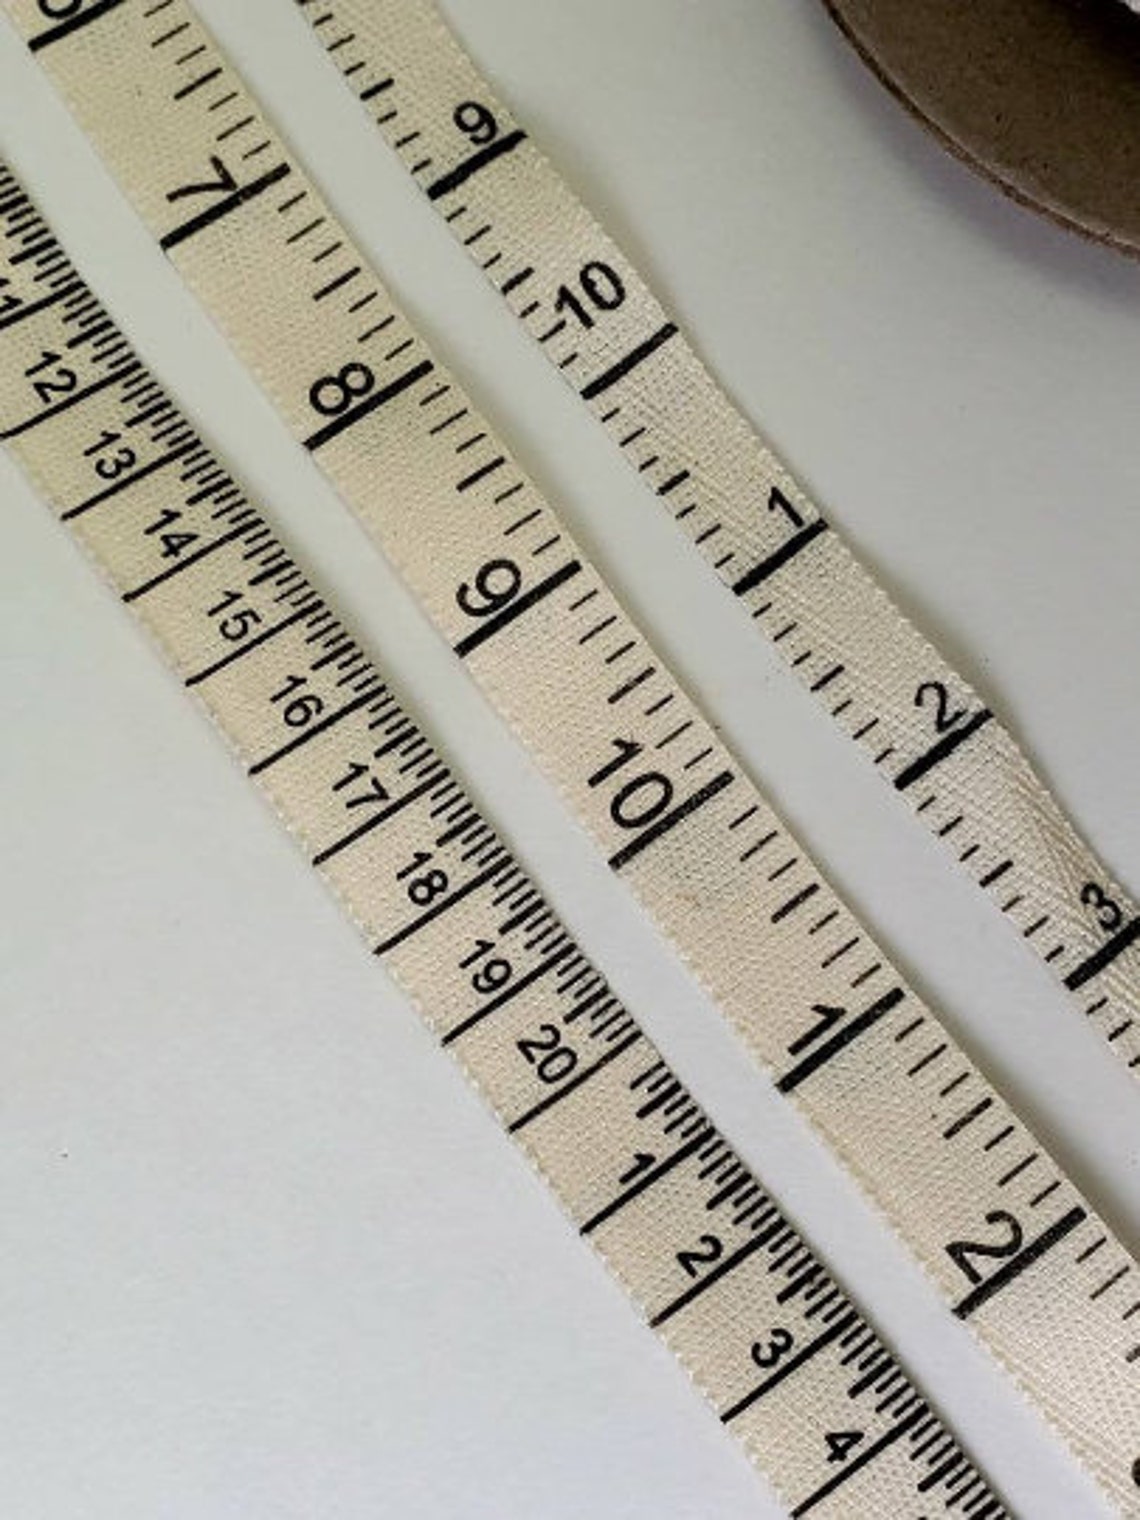 Fabric trim ruler twill tape print sold by the yard. | Etsy